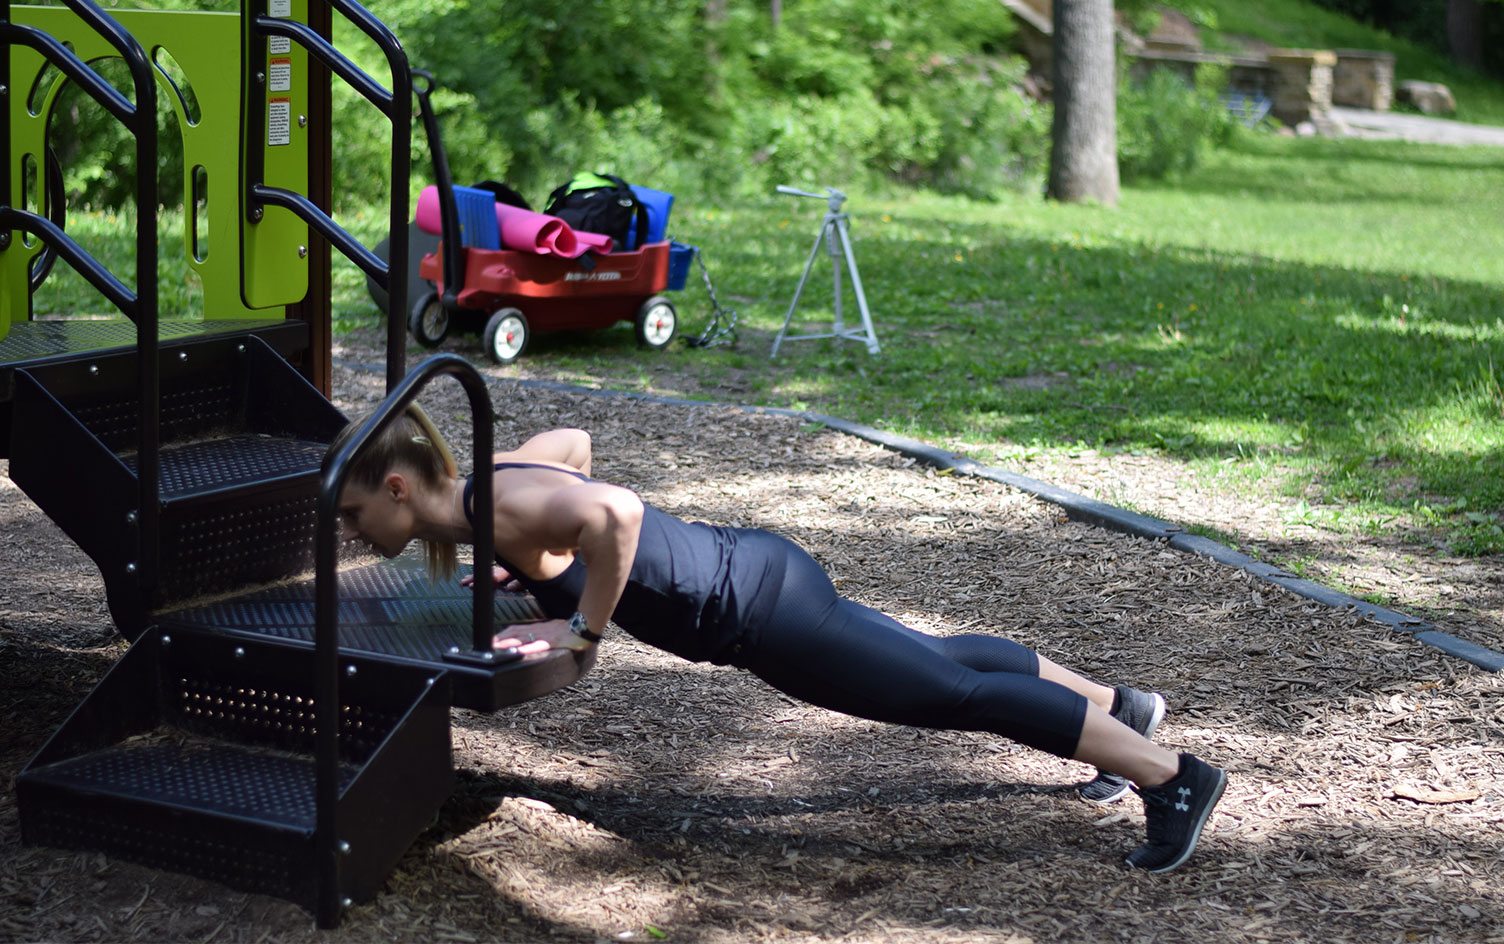 Park workout: A full-body fitness routine to get you in shape - Chatelaine